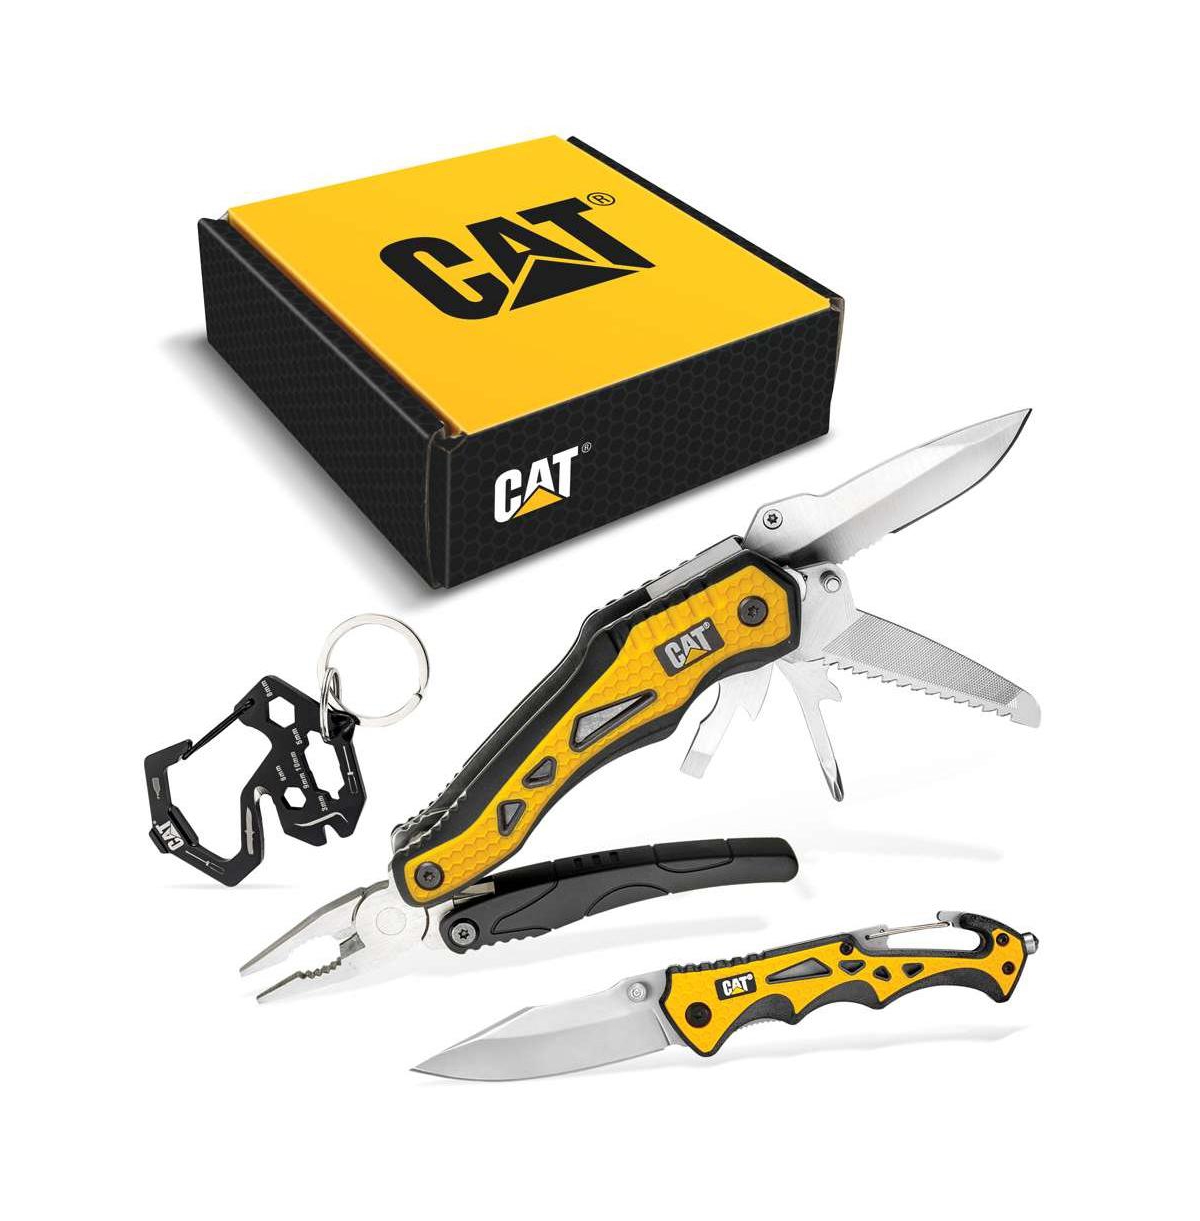 3 Piece 10-in-1 Multi-Tool, Knife, and Key Chain Gift Box Set